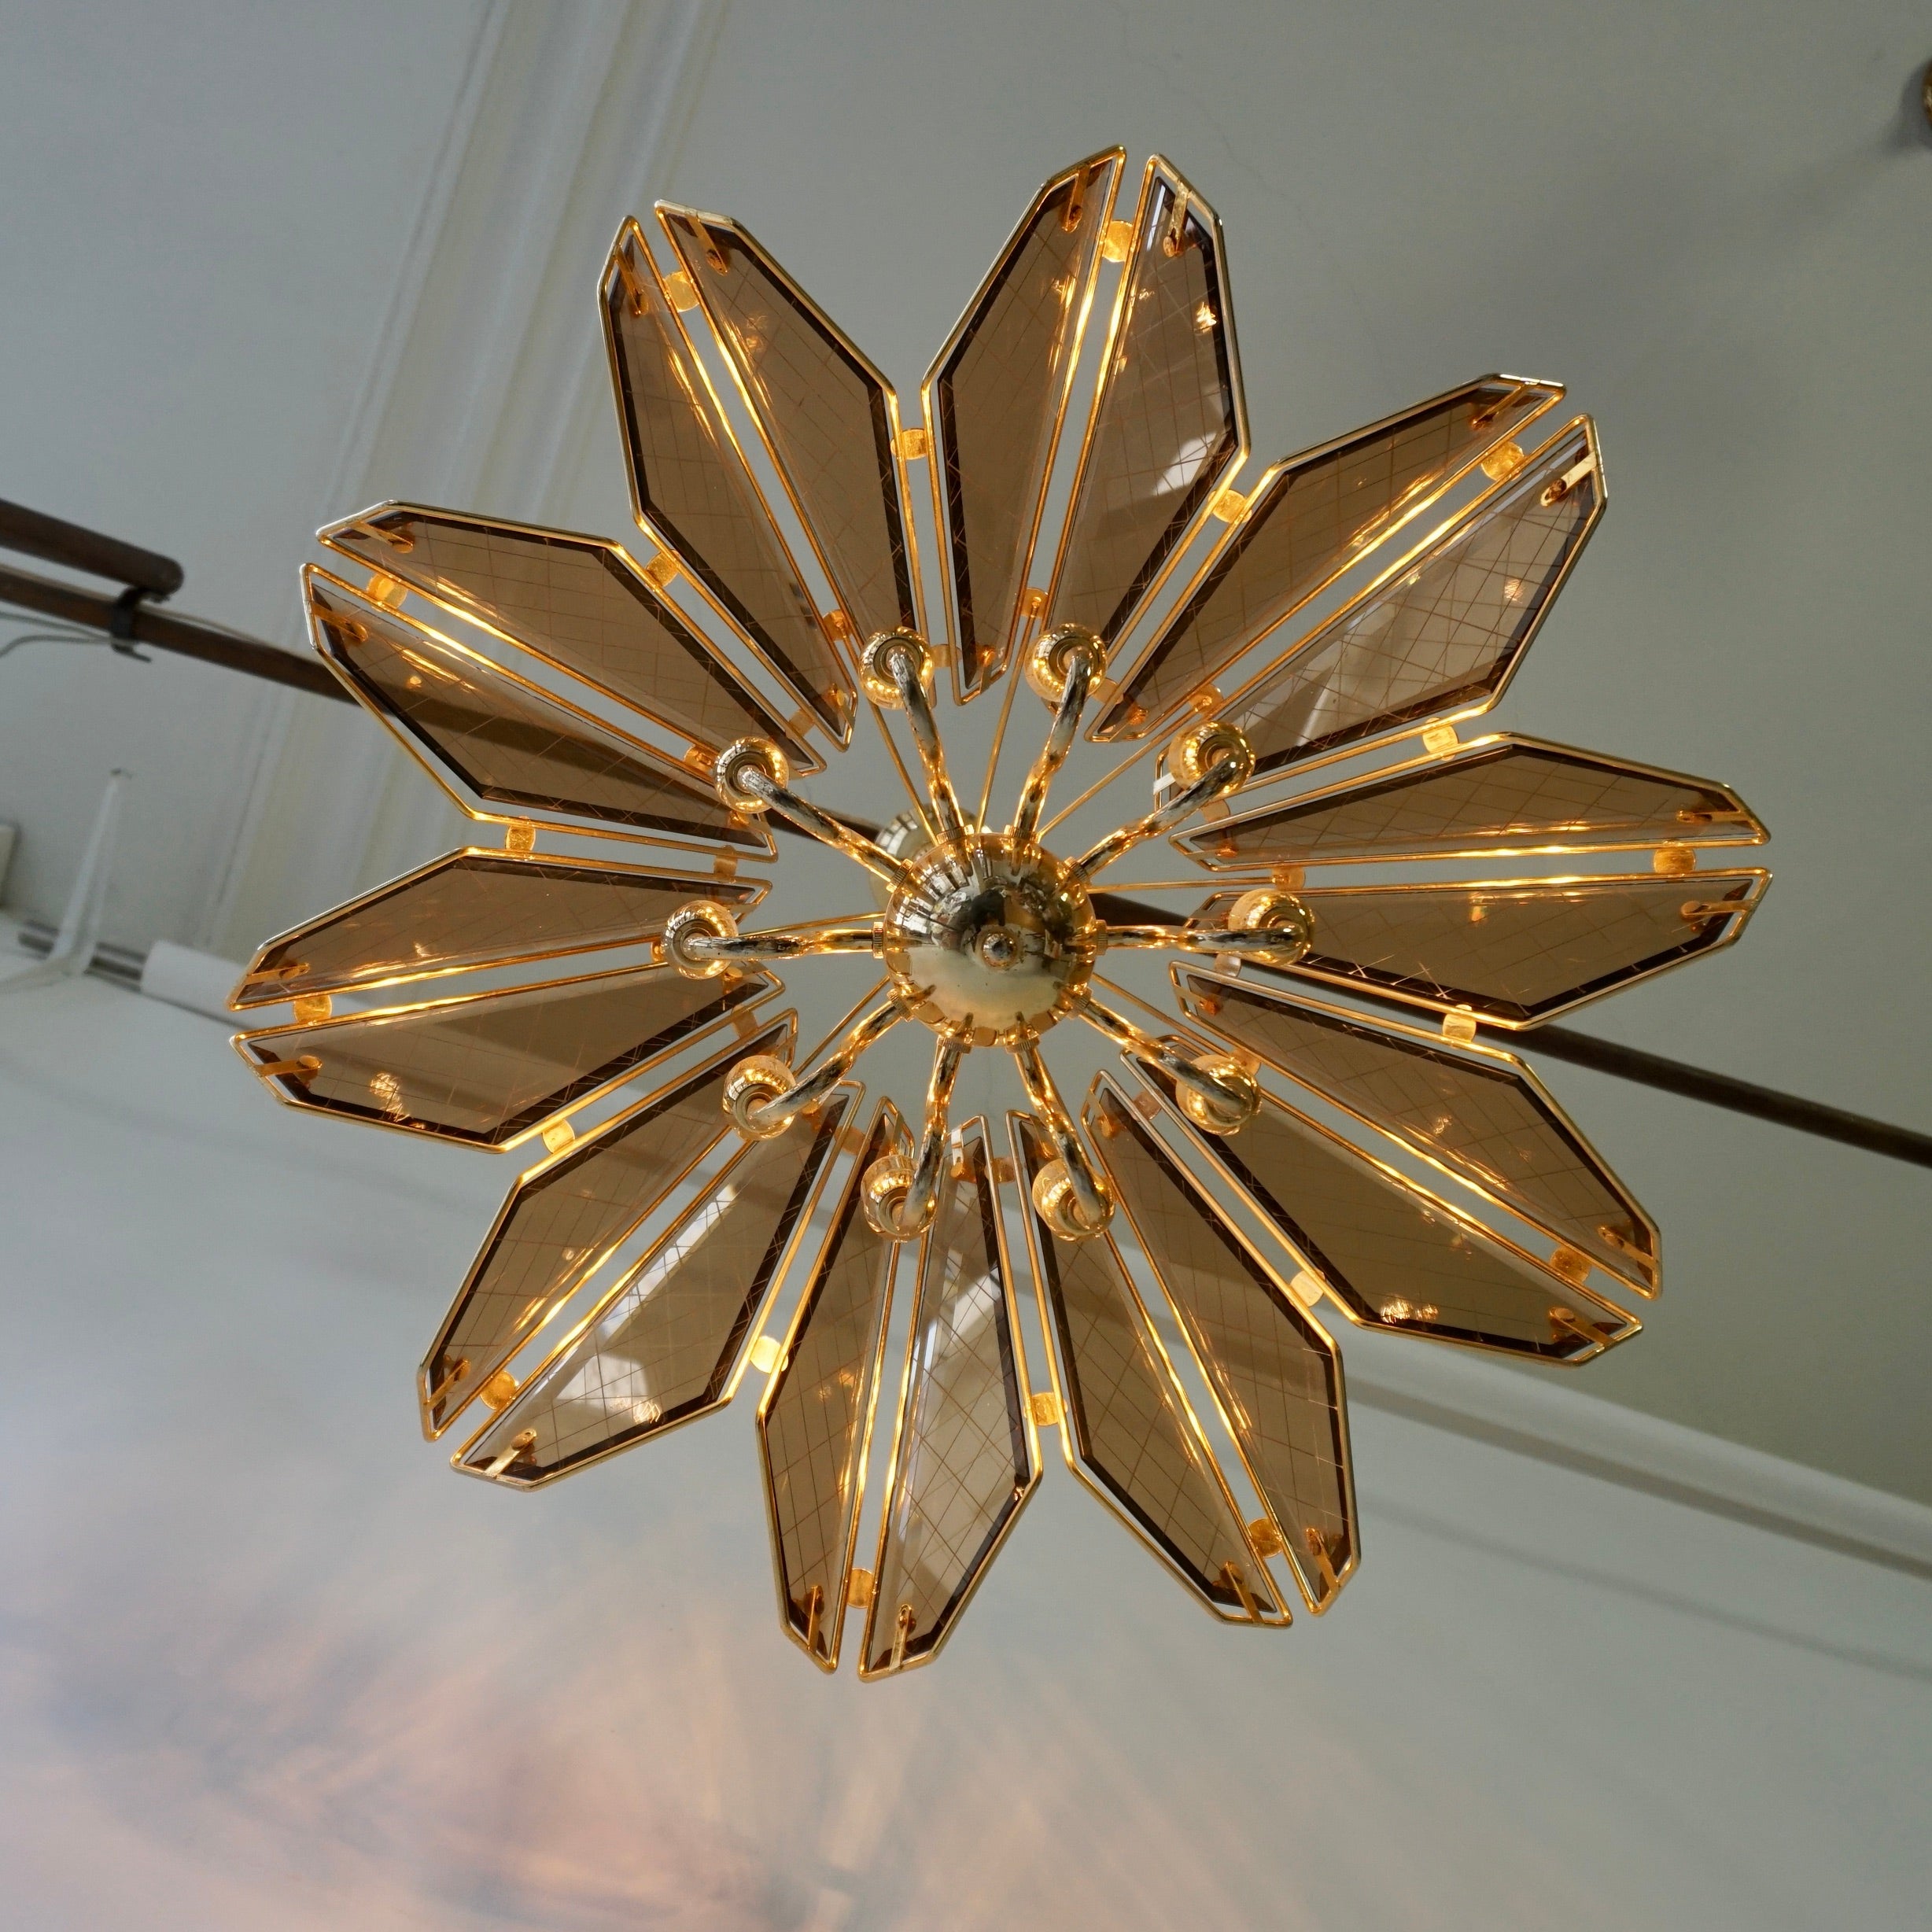 A large Italian Hollywood Regency ten-armed chandelier manufactured in the mid-century (1960s and 1970s). 

Chandelier in the Hollywood Regency style. Made of smoked glass and brass. The panels are facet cut. One of the panels has a mini chip on the